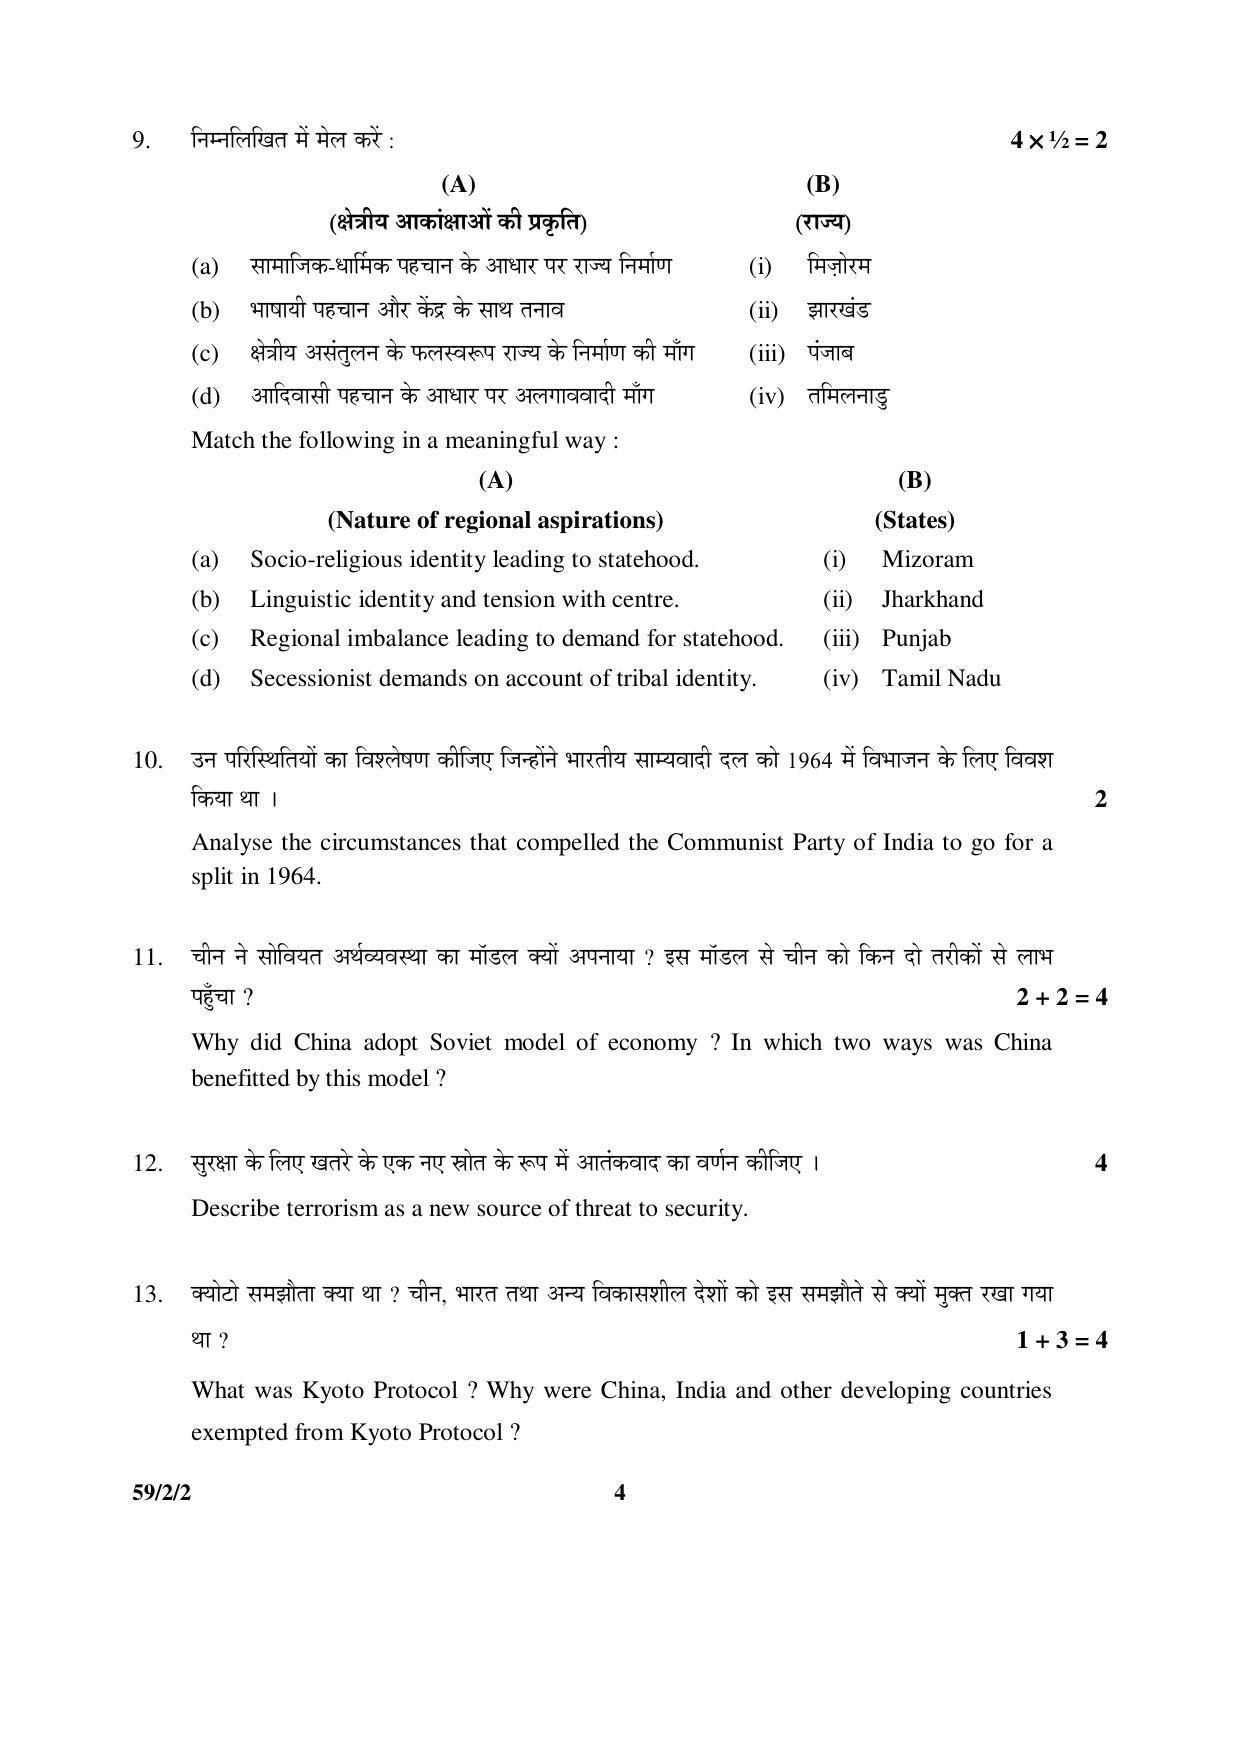 CBSE Class 12 59-2-2 _Political Science 2016 Question Paper - Page 4